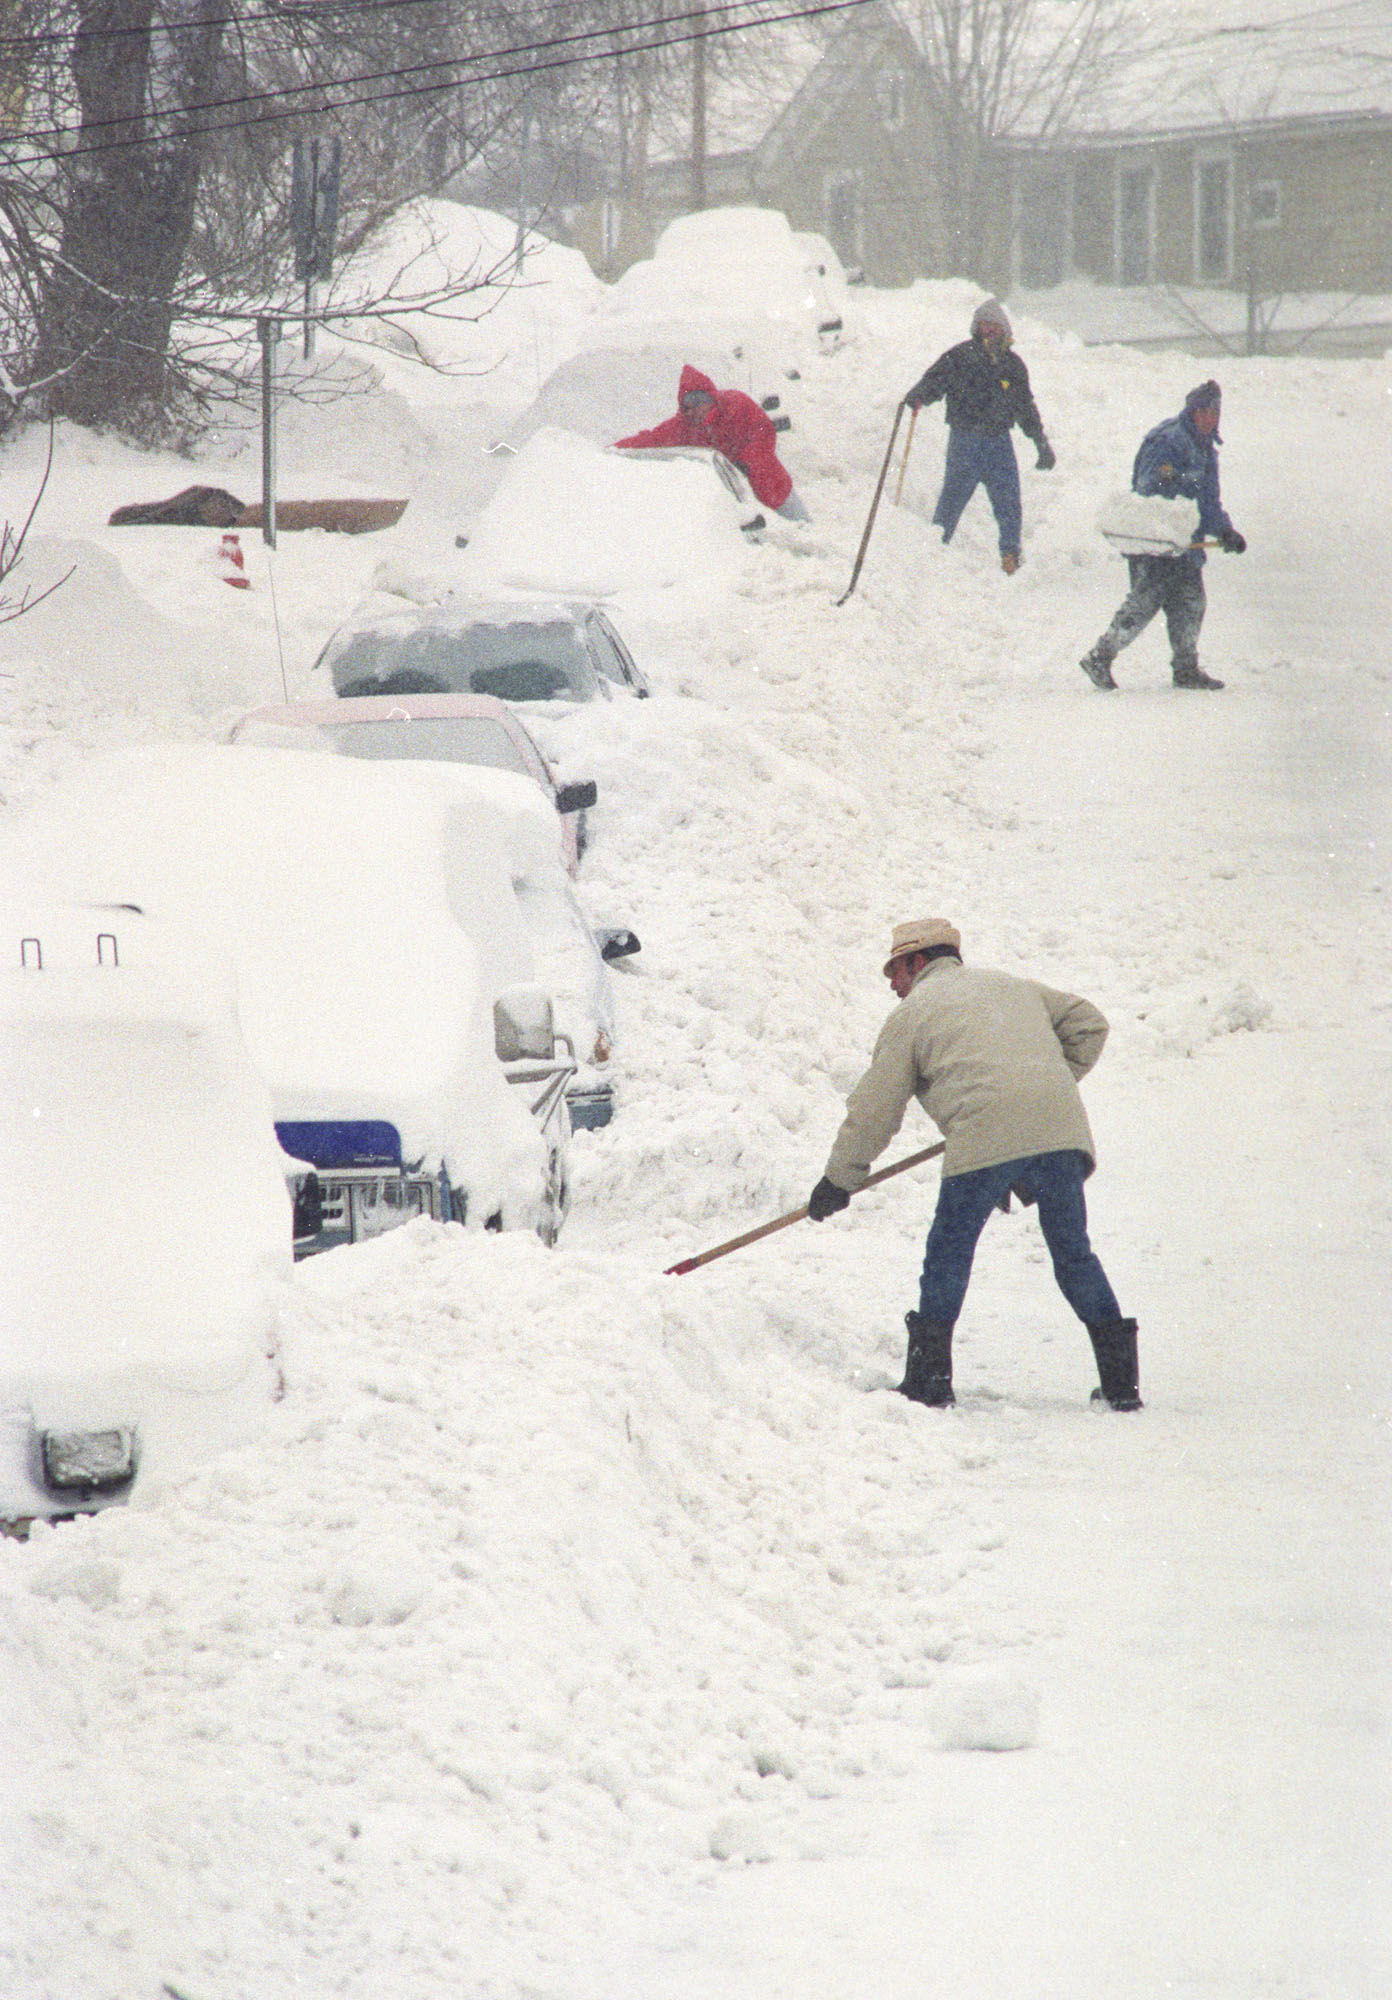 People along Seward Street in Syracuse on March 14, 1993 dig out their cars from the snow storm that dumped some 40 inches of snow on the area. Nicholas Lisi / The Post-Standard